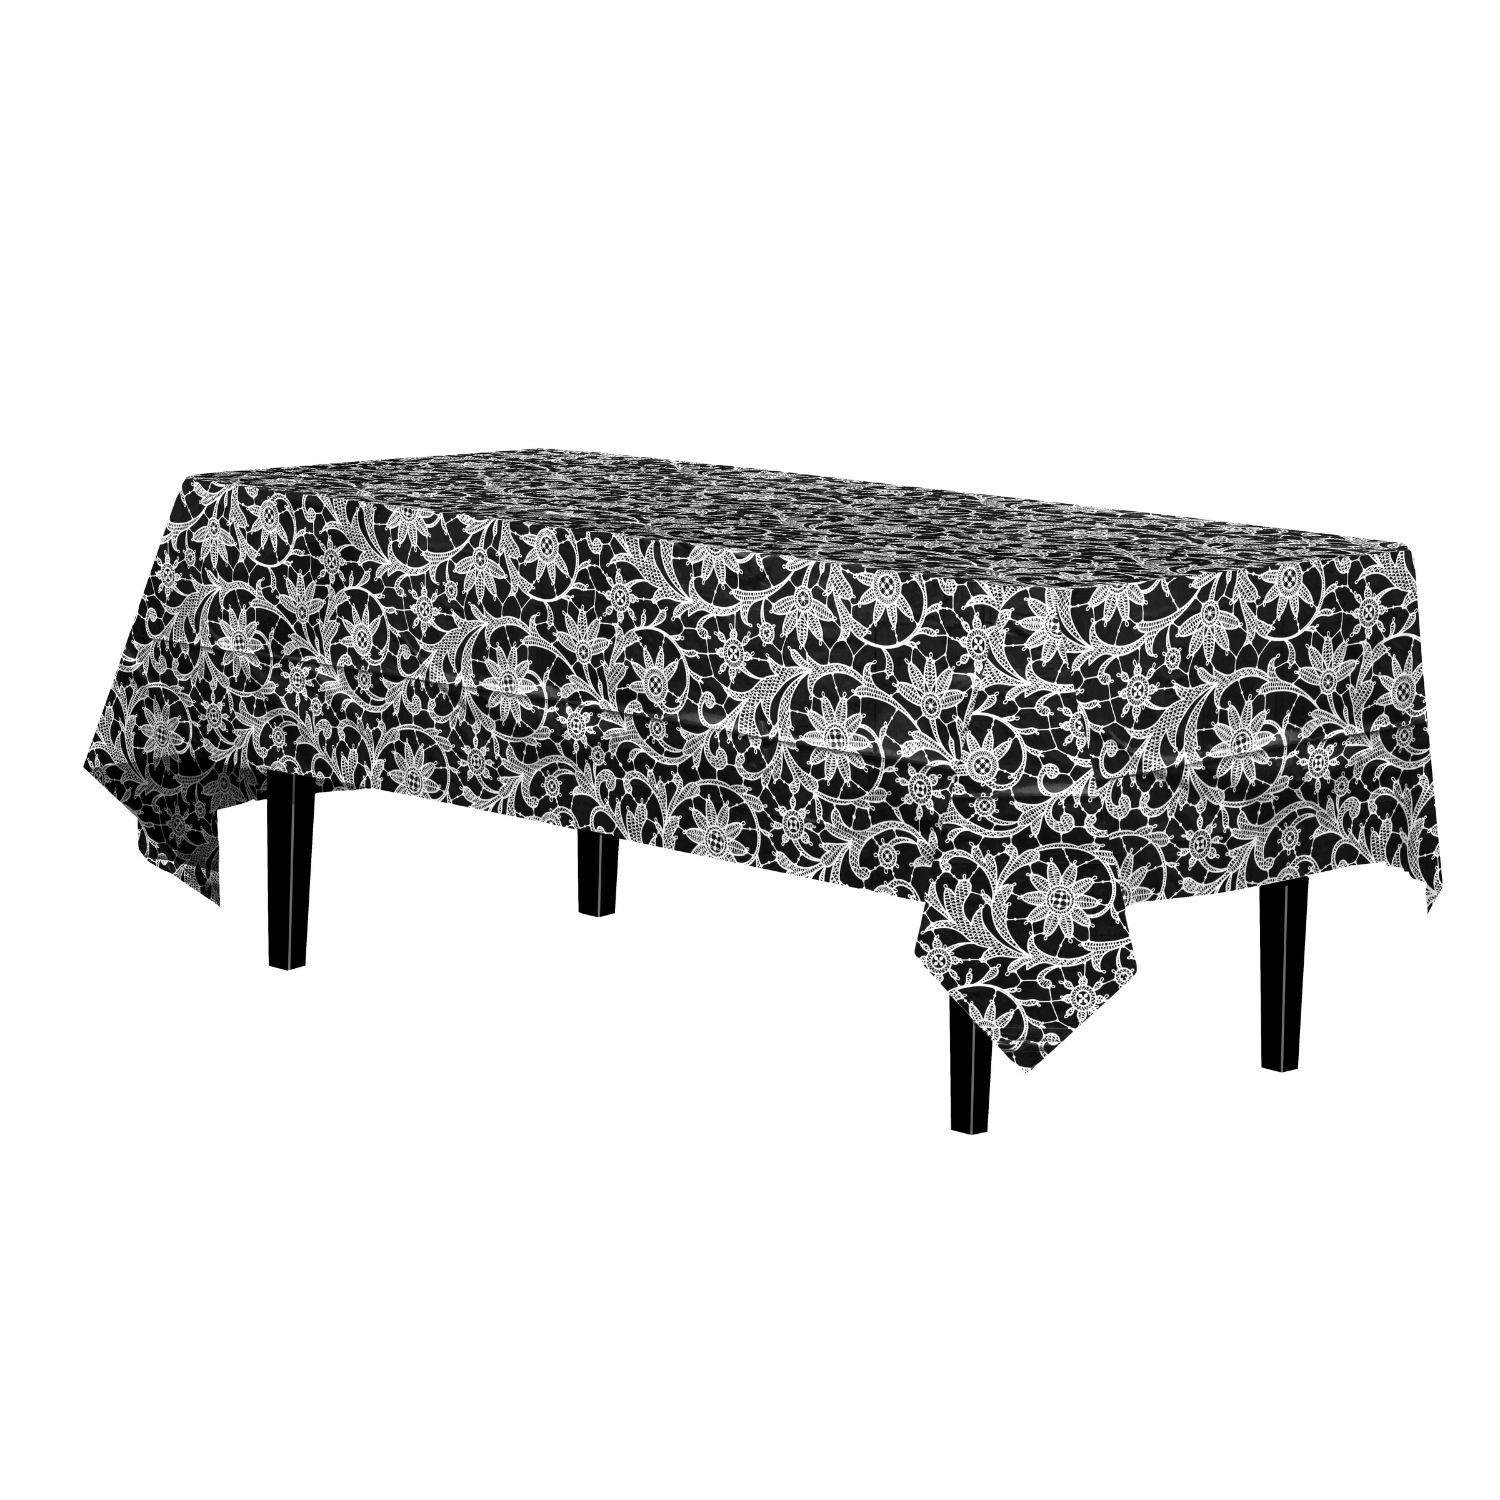 54in. x 108in. Printed Plastic Table cover White Lace - 48 ct.